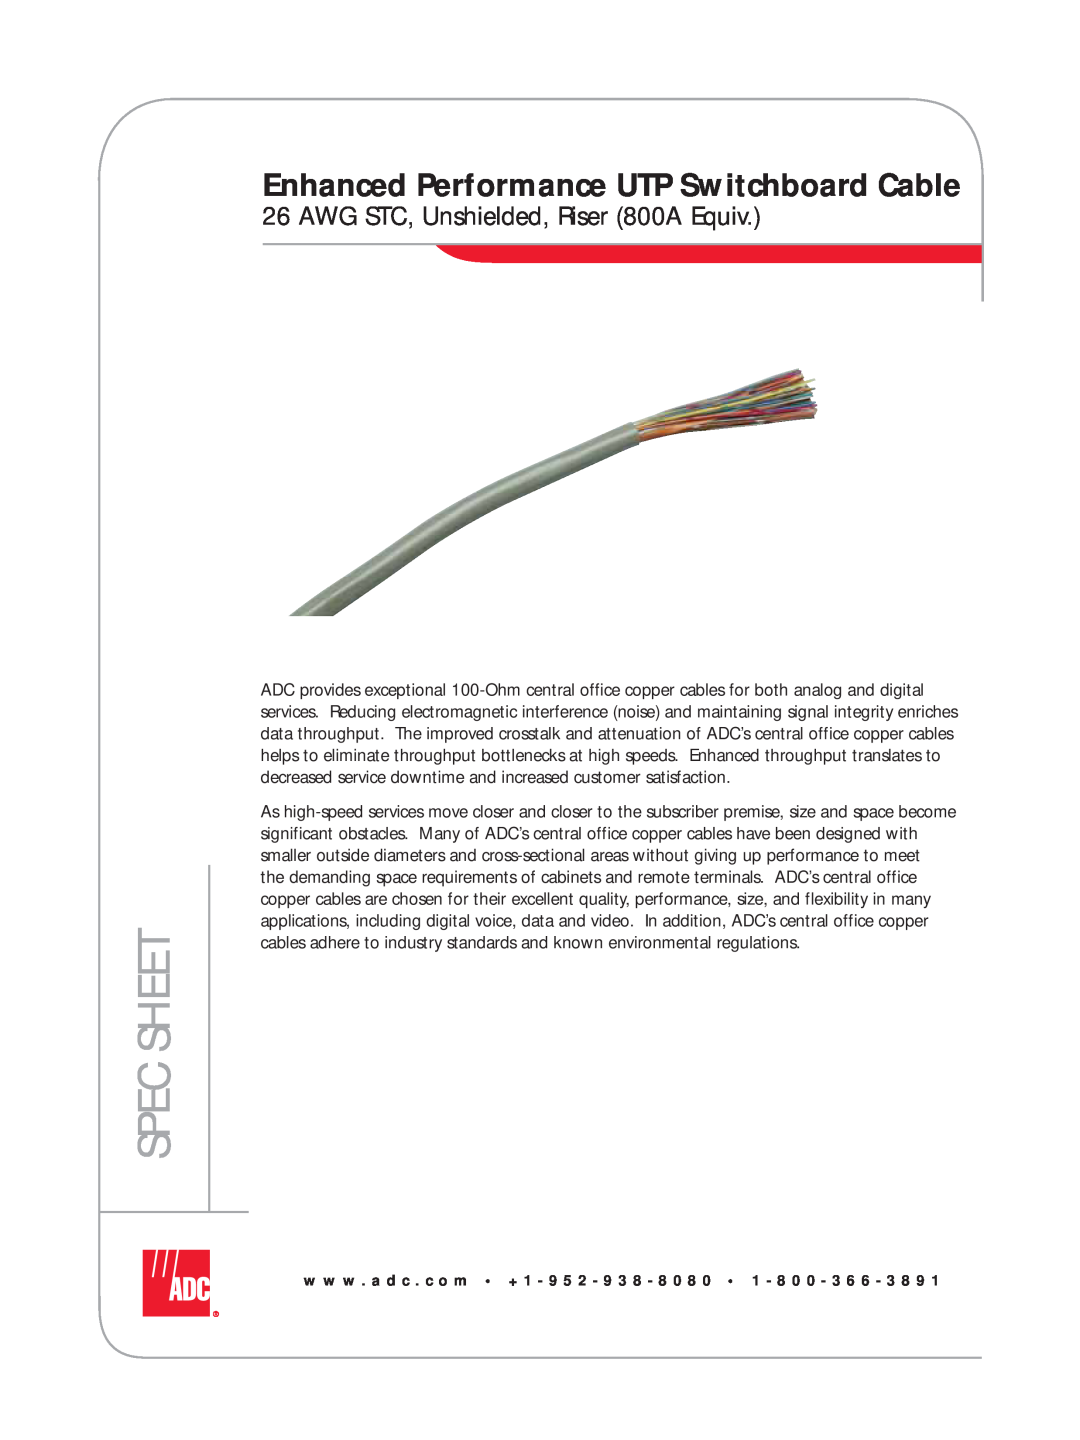 ADC manual Enhanced Performance UTP Switchboard Cable, AWG STC, Unshielded, Riser 800A Equiv, Spec Sheet 